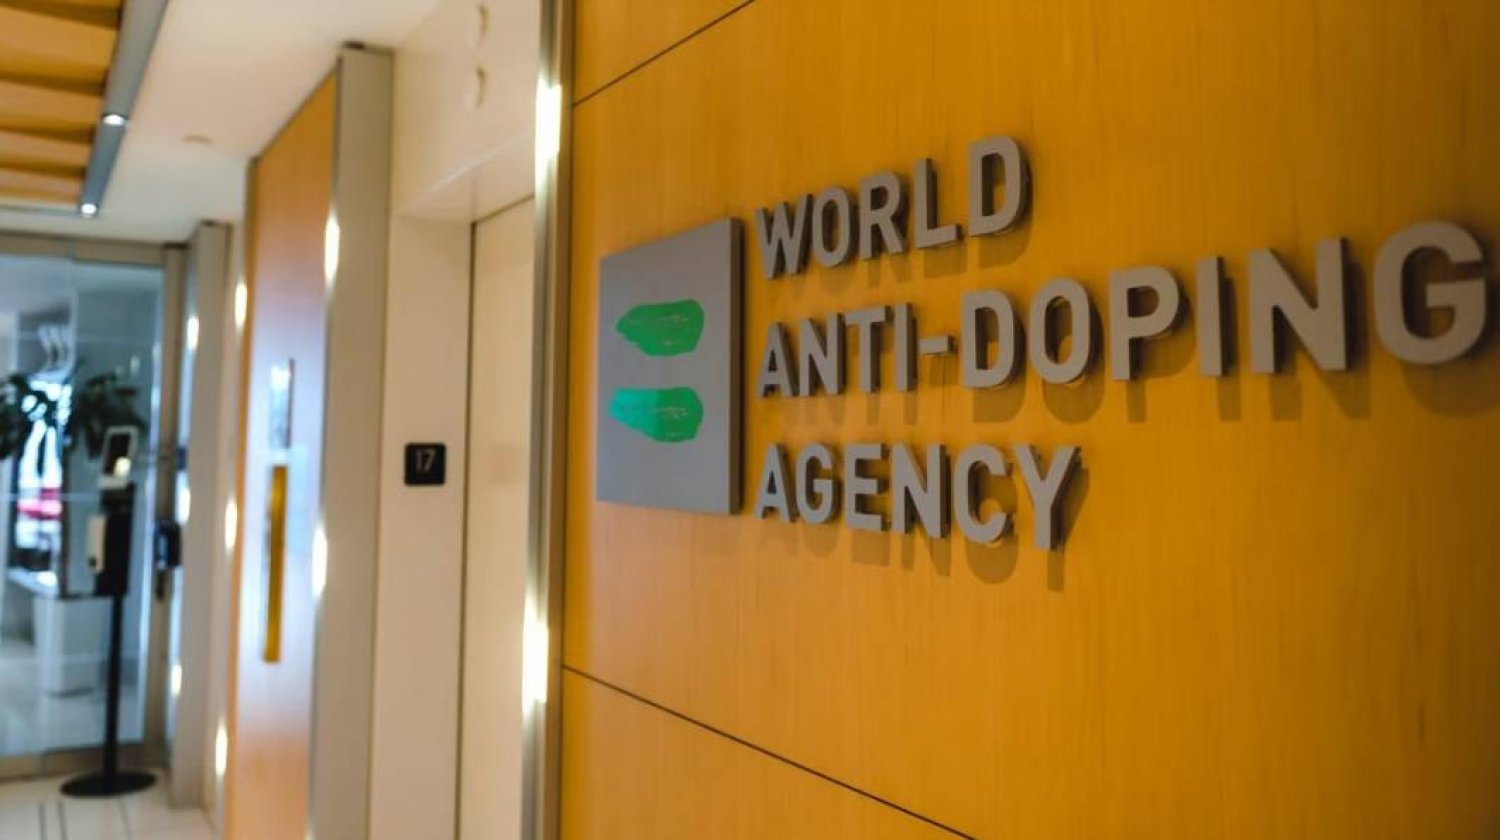 The headquarters of the World Anti-Doping Agency (WADA) in Montreal, Canada. AFP